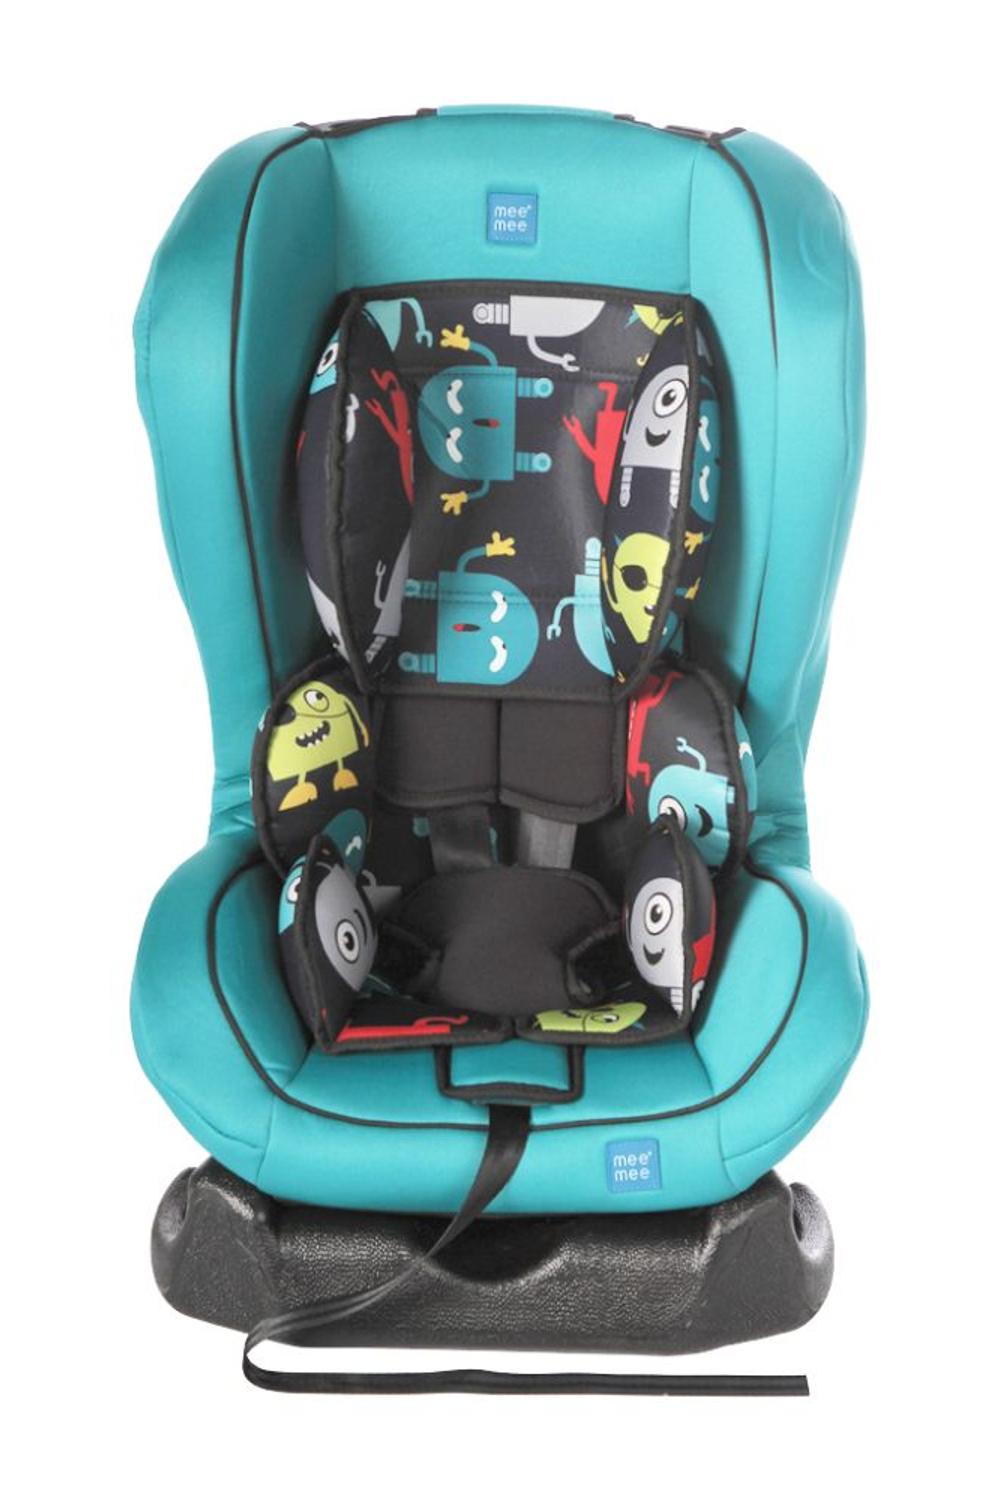 Mee Mee Grow with me Convertible Baby Car Seat (Re